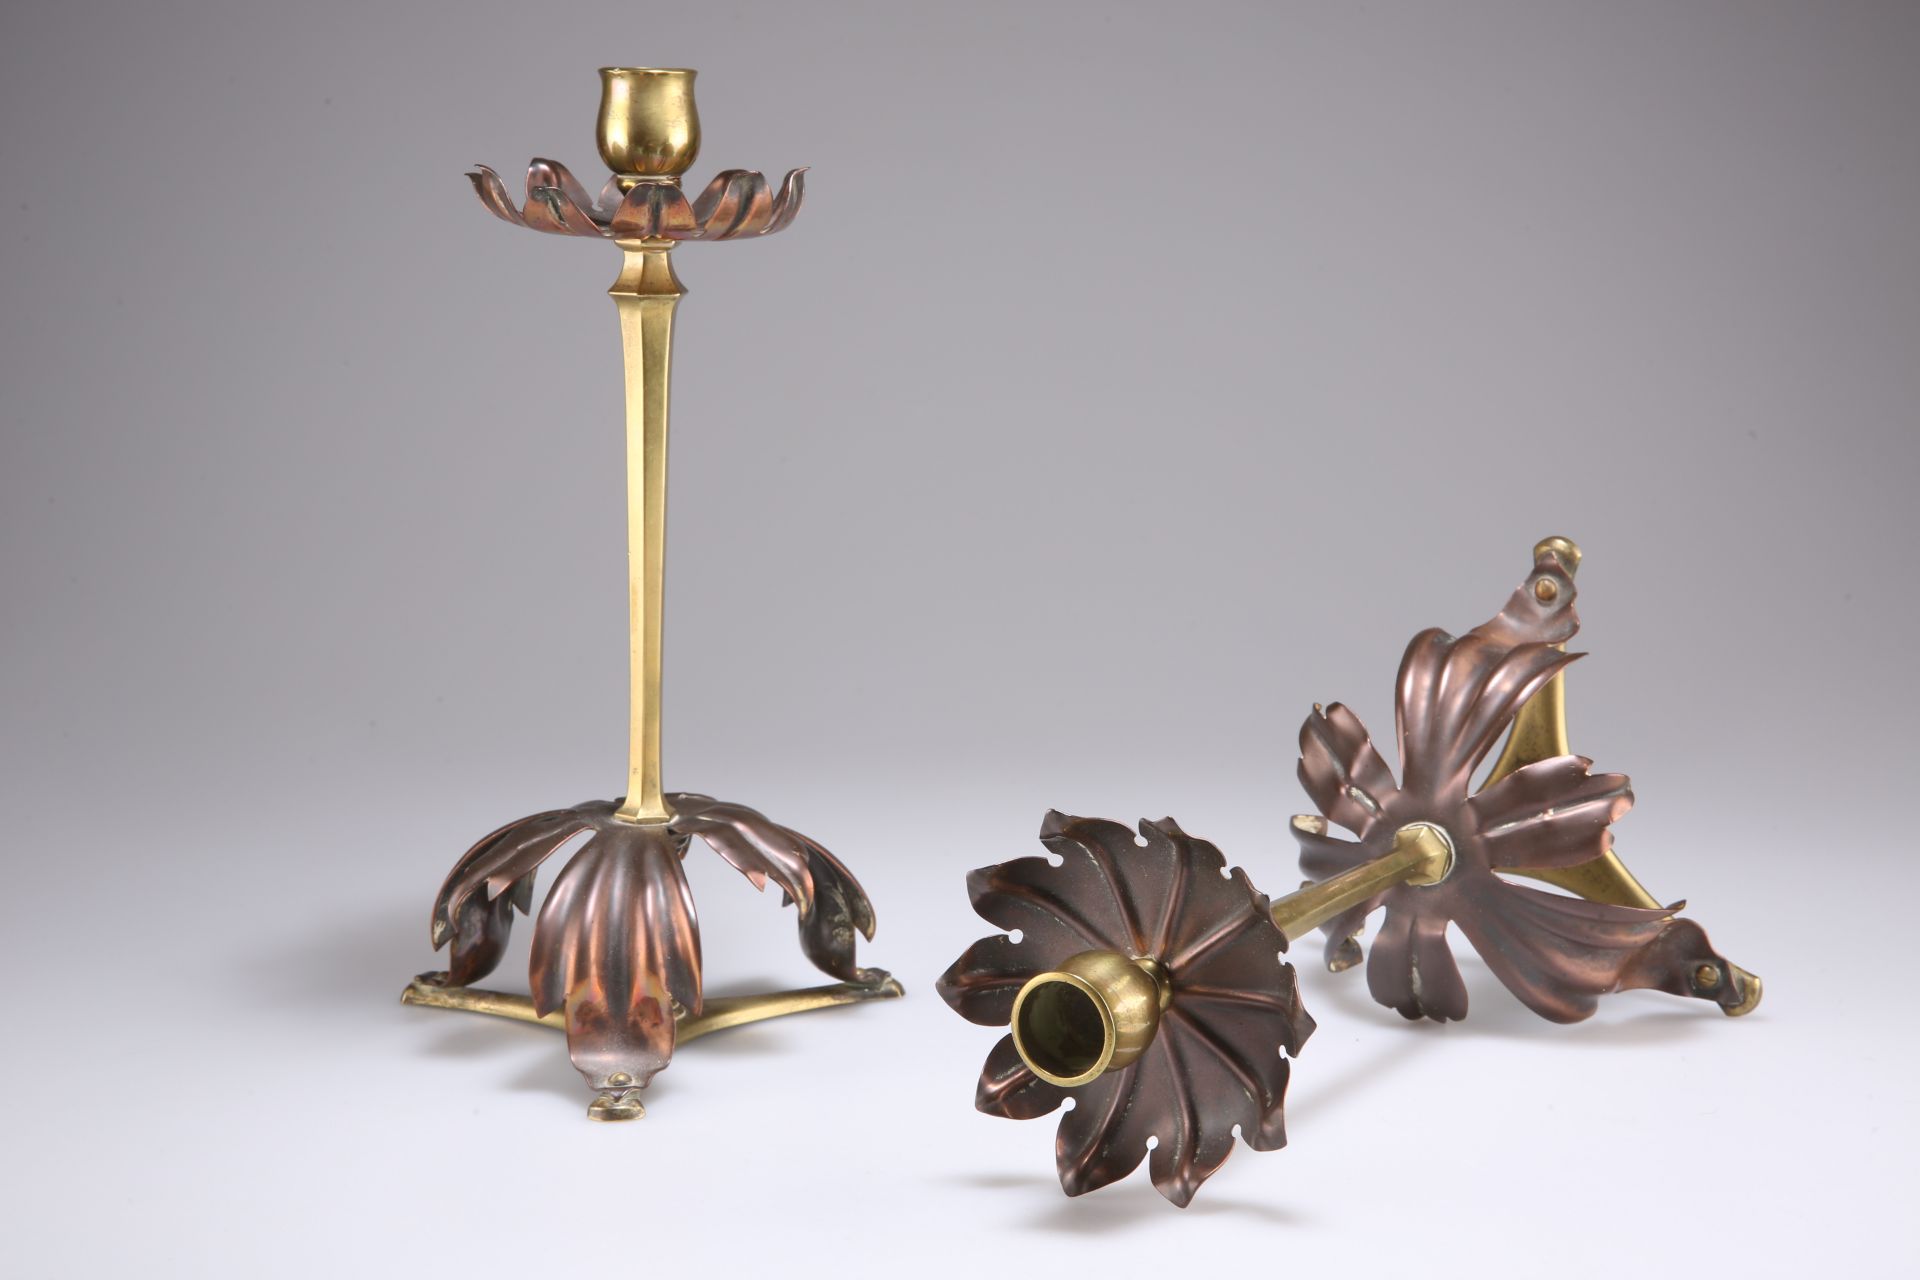 WILLIAM ARTHUR SMITH (W.A.S) BENSON (1854-1924), A PAIR OF ARTS & CRAFTS BRASS AND COPPER CANDLESTIC - Image 3 of 3